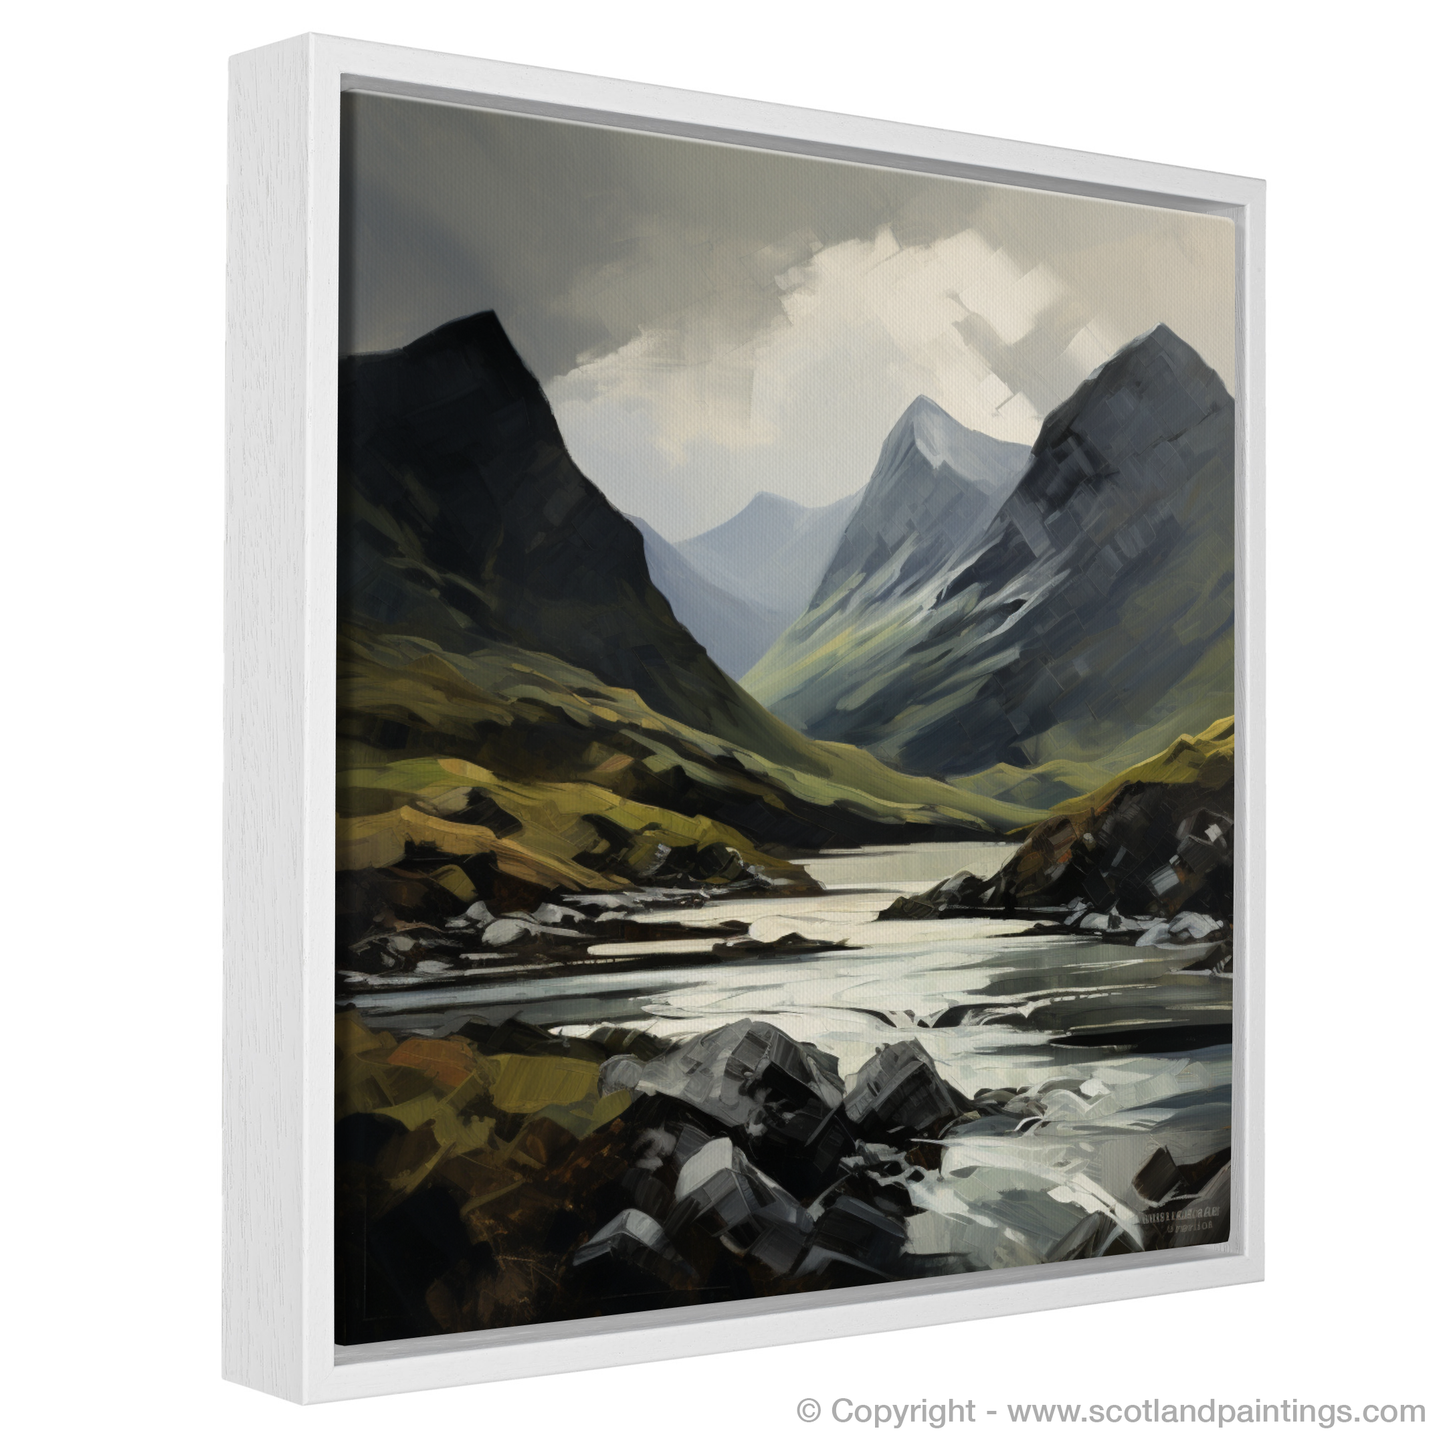 Painting and Art Print of Liathach, Wester Ross entitled "Liathach's Wild Beauty: An Expressionist Journey Through Wester Ross".